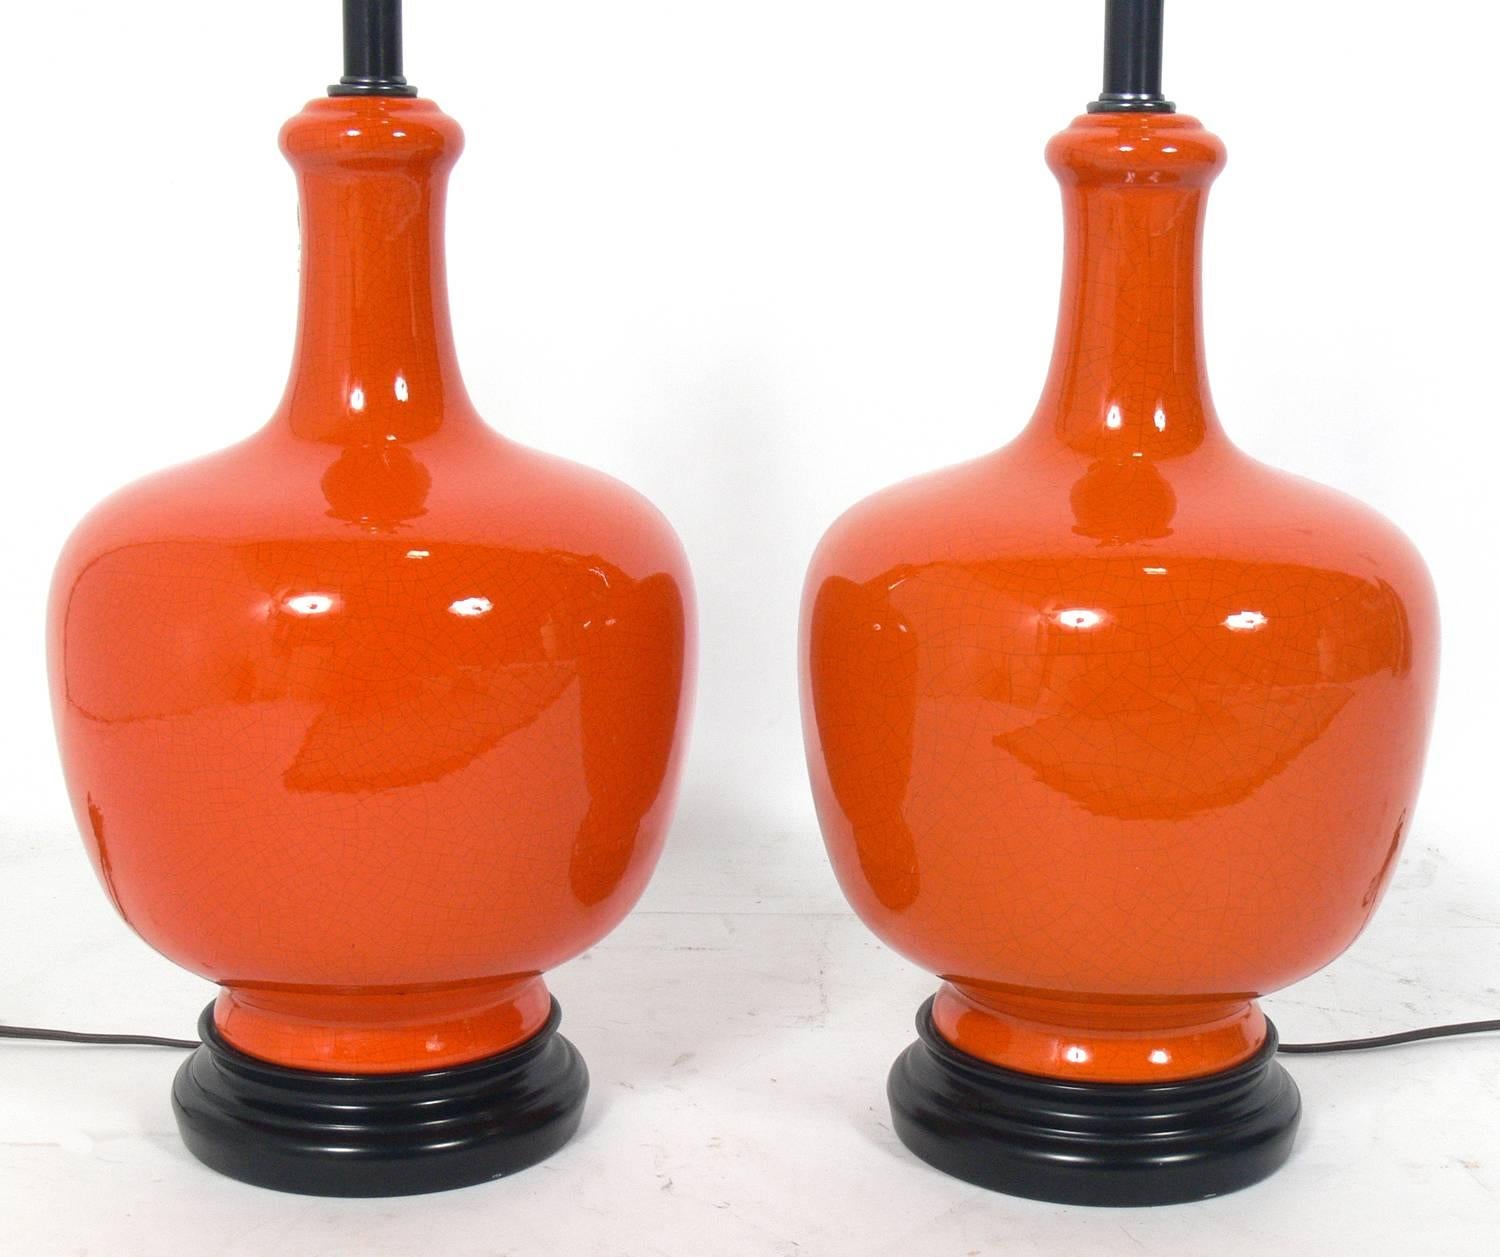 Pair of vibrant orange ceramic lamps, American, circa 1950s. They have a subtle Asian influence and the vibrant orange ceramic bodies exhibit beautiful craquelure. Rewired. The price noted below includes the shades.